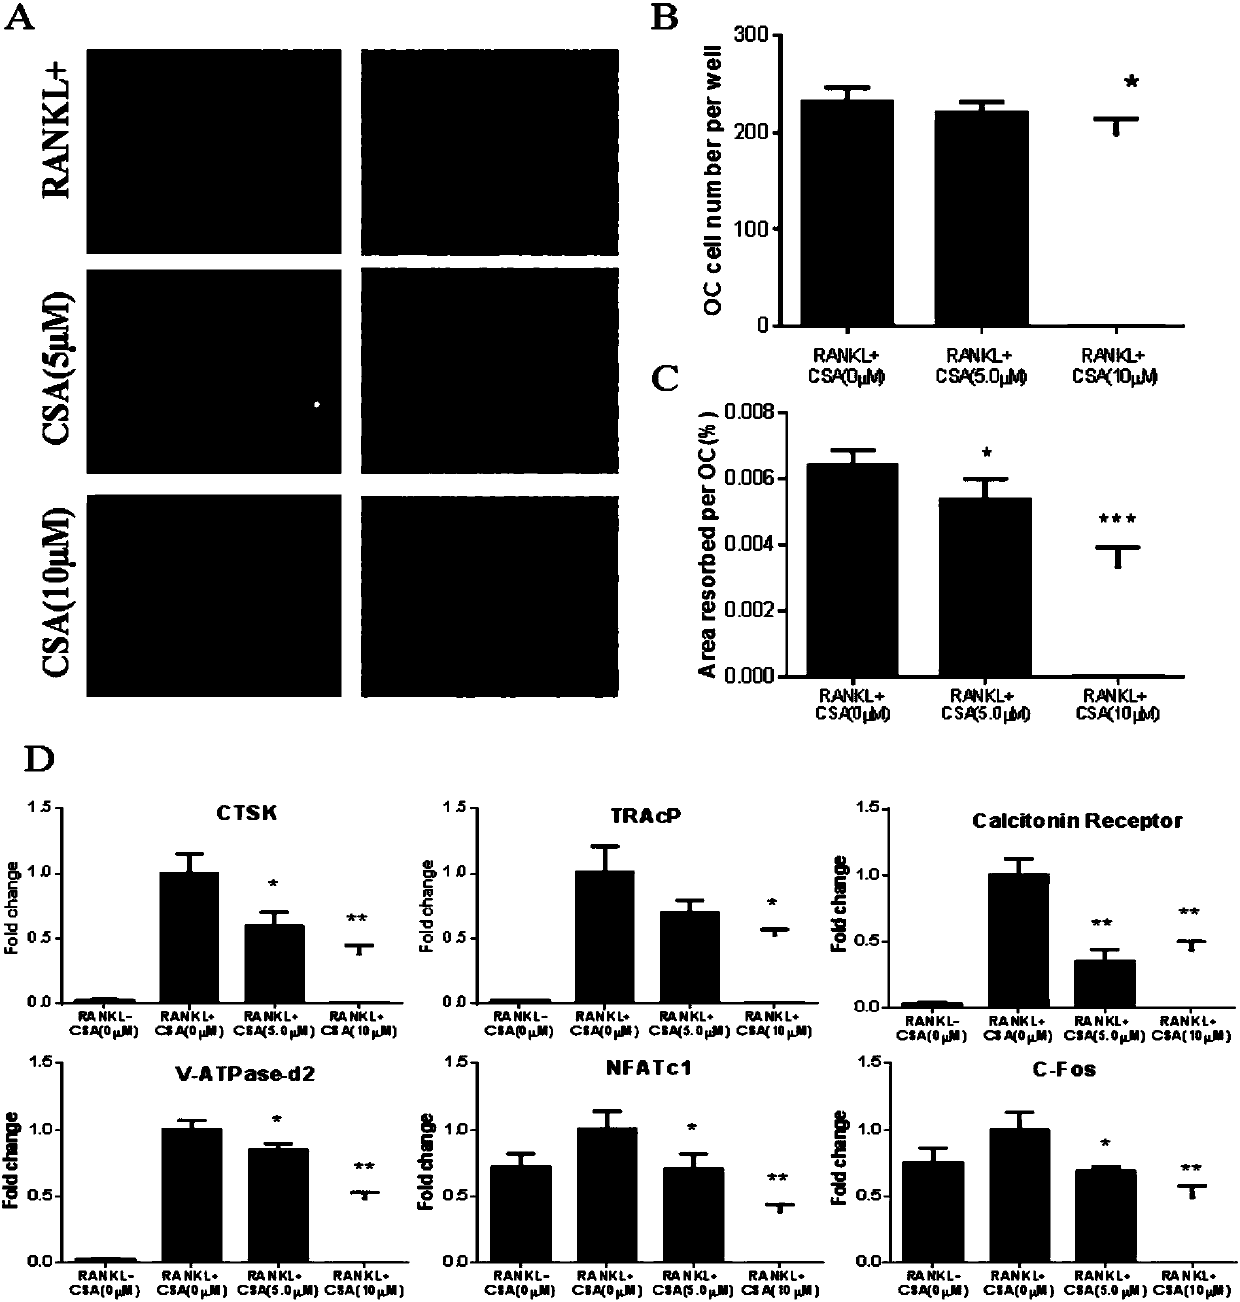 Application of Longistyline A-2-carboxylic acid in osteoclast formation inhibiting and osteoporosis preventing medicines